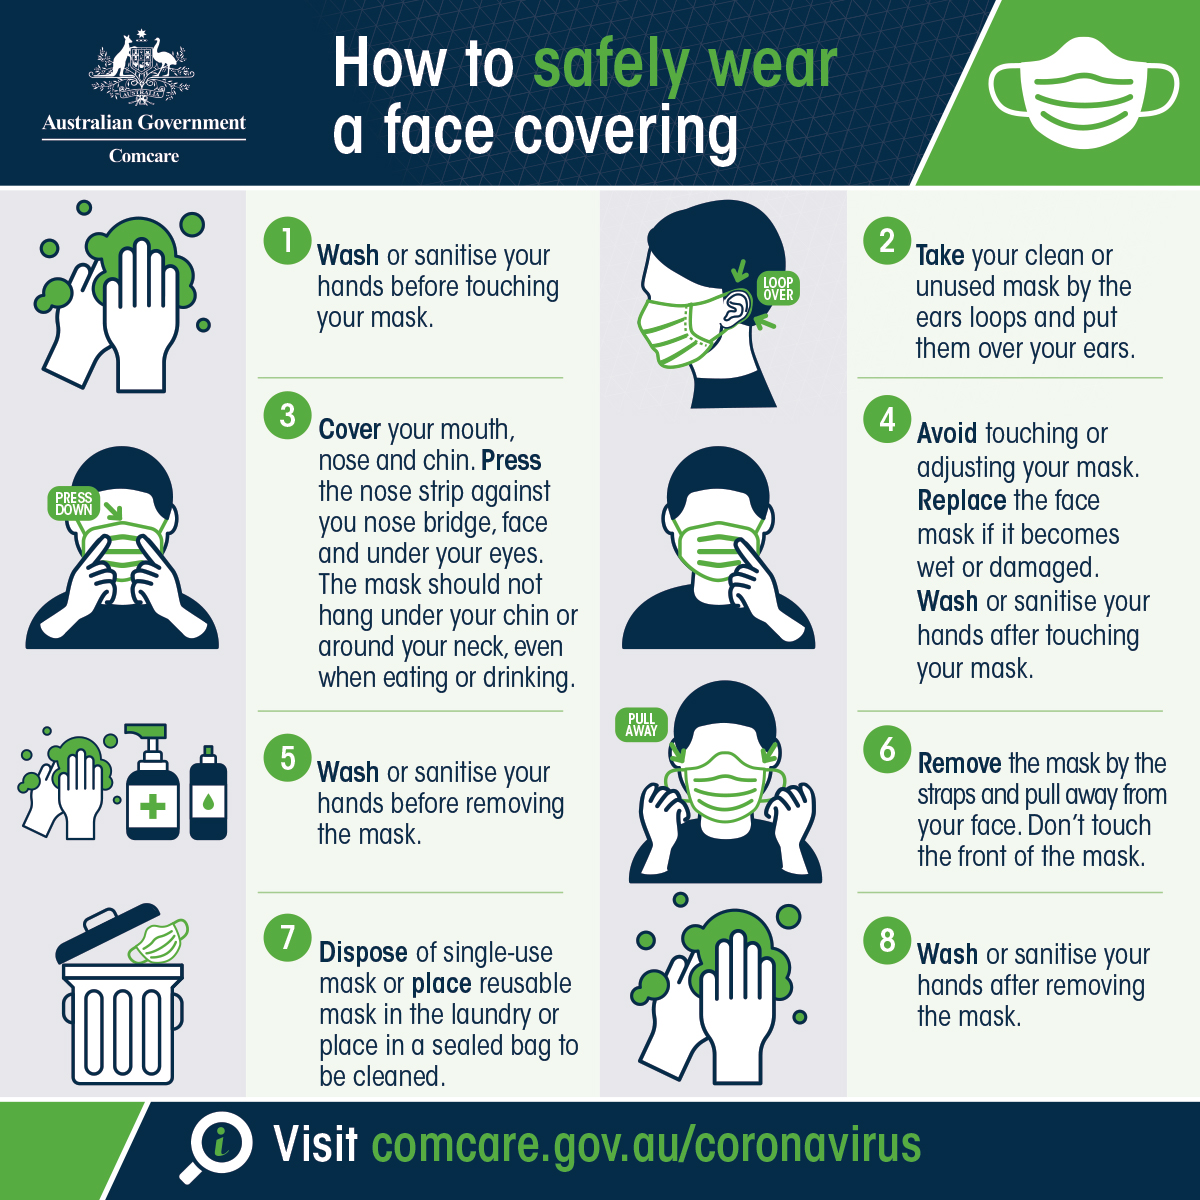 How to safely wear a face covering. 1. Wash or sanitise your hands before touching your mask. 2. Take your clean or unused mask by the ears loops and put them over your ears. 3. Cover your mouth, nose and chin. Press the nose strip against you nose bridge, face and under your eyes. The mask should not hang under your chin or around your neck, even when eating or drinking. 4. Avoid touching or adjusting your mask. Replace the face mask if it becomes wet or damaged. Wash or sanitise your hands after touching your mask. 5. Wash or sanitise your hands before removing the mask. 6. Remove the mask by the straps and pull away from your face. Don’t touch the front of the mask. 7. Dispose of single-use mask or place a reusable mask in the laundry or place in a sealed bag to be cleaned. 8. Wash or sanitise your hands after removing the mask.